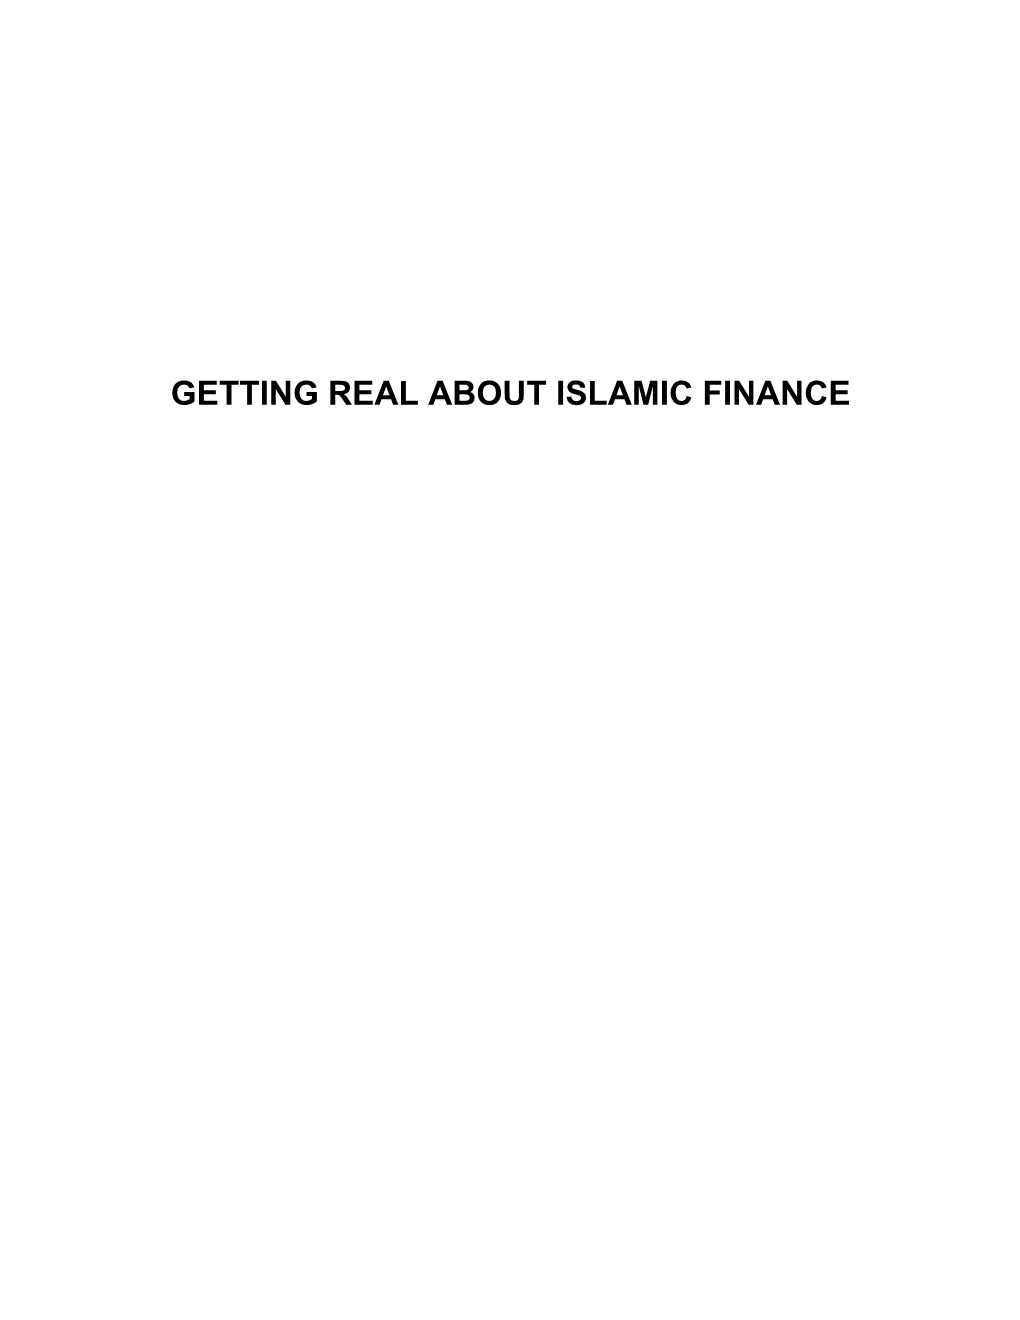 Getting Real About Islamic Finance